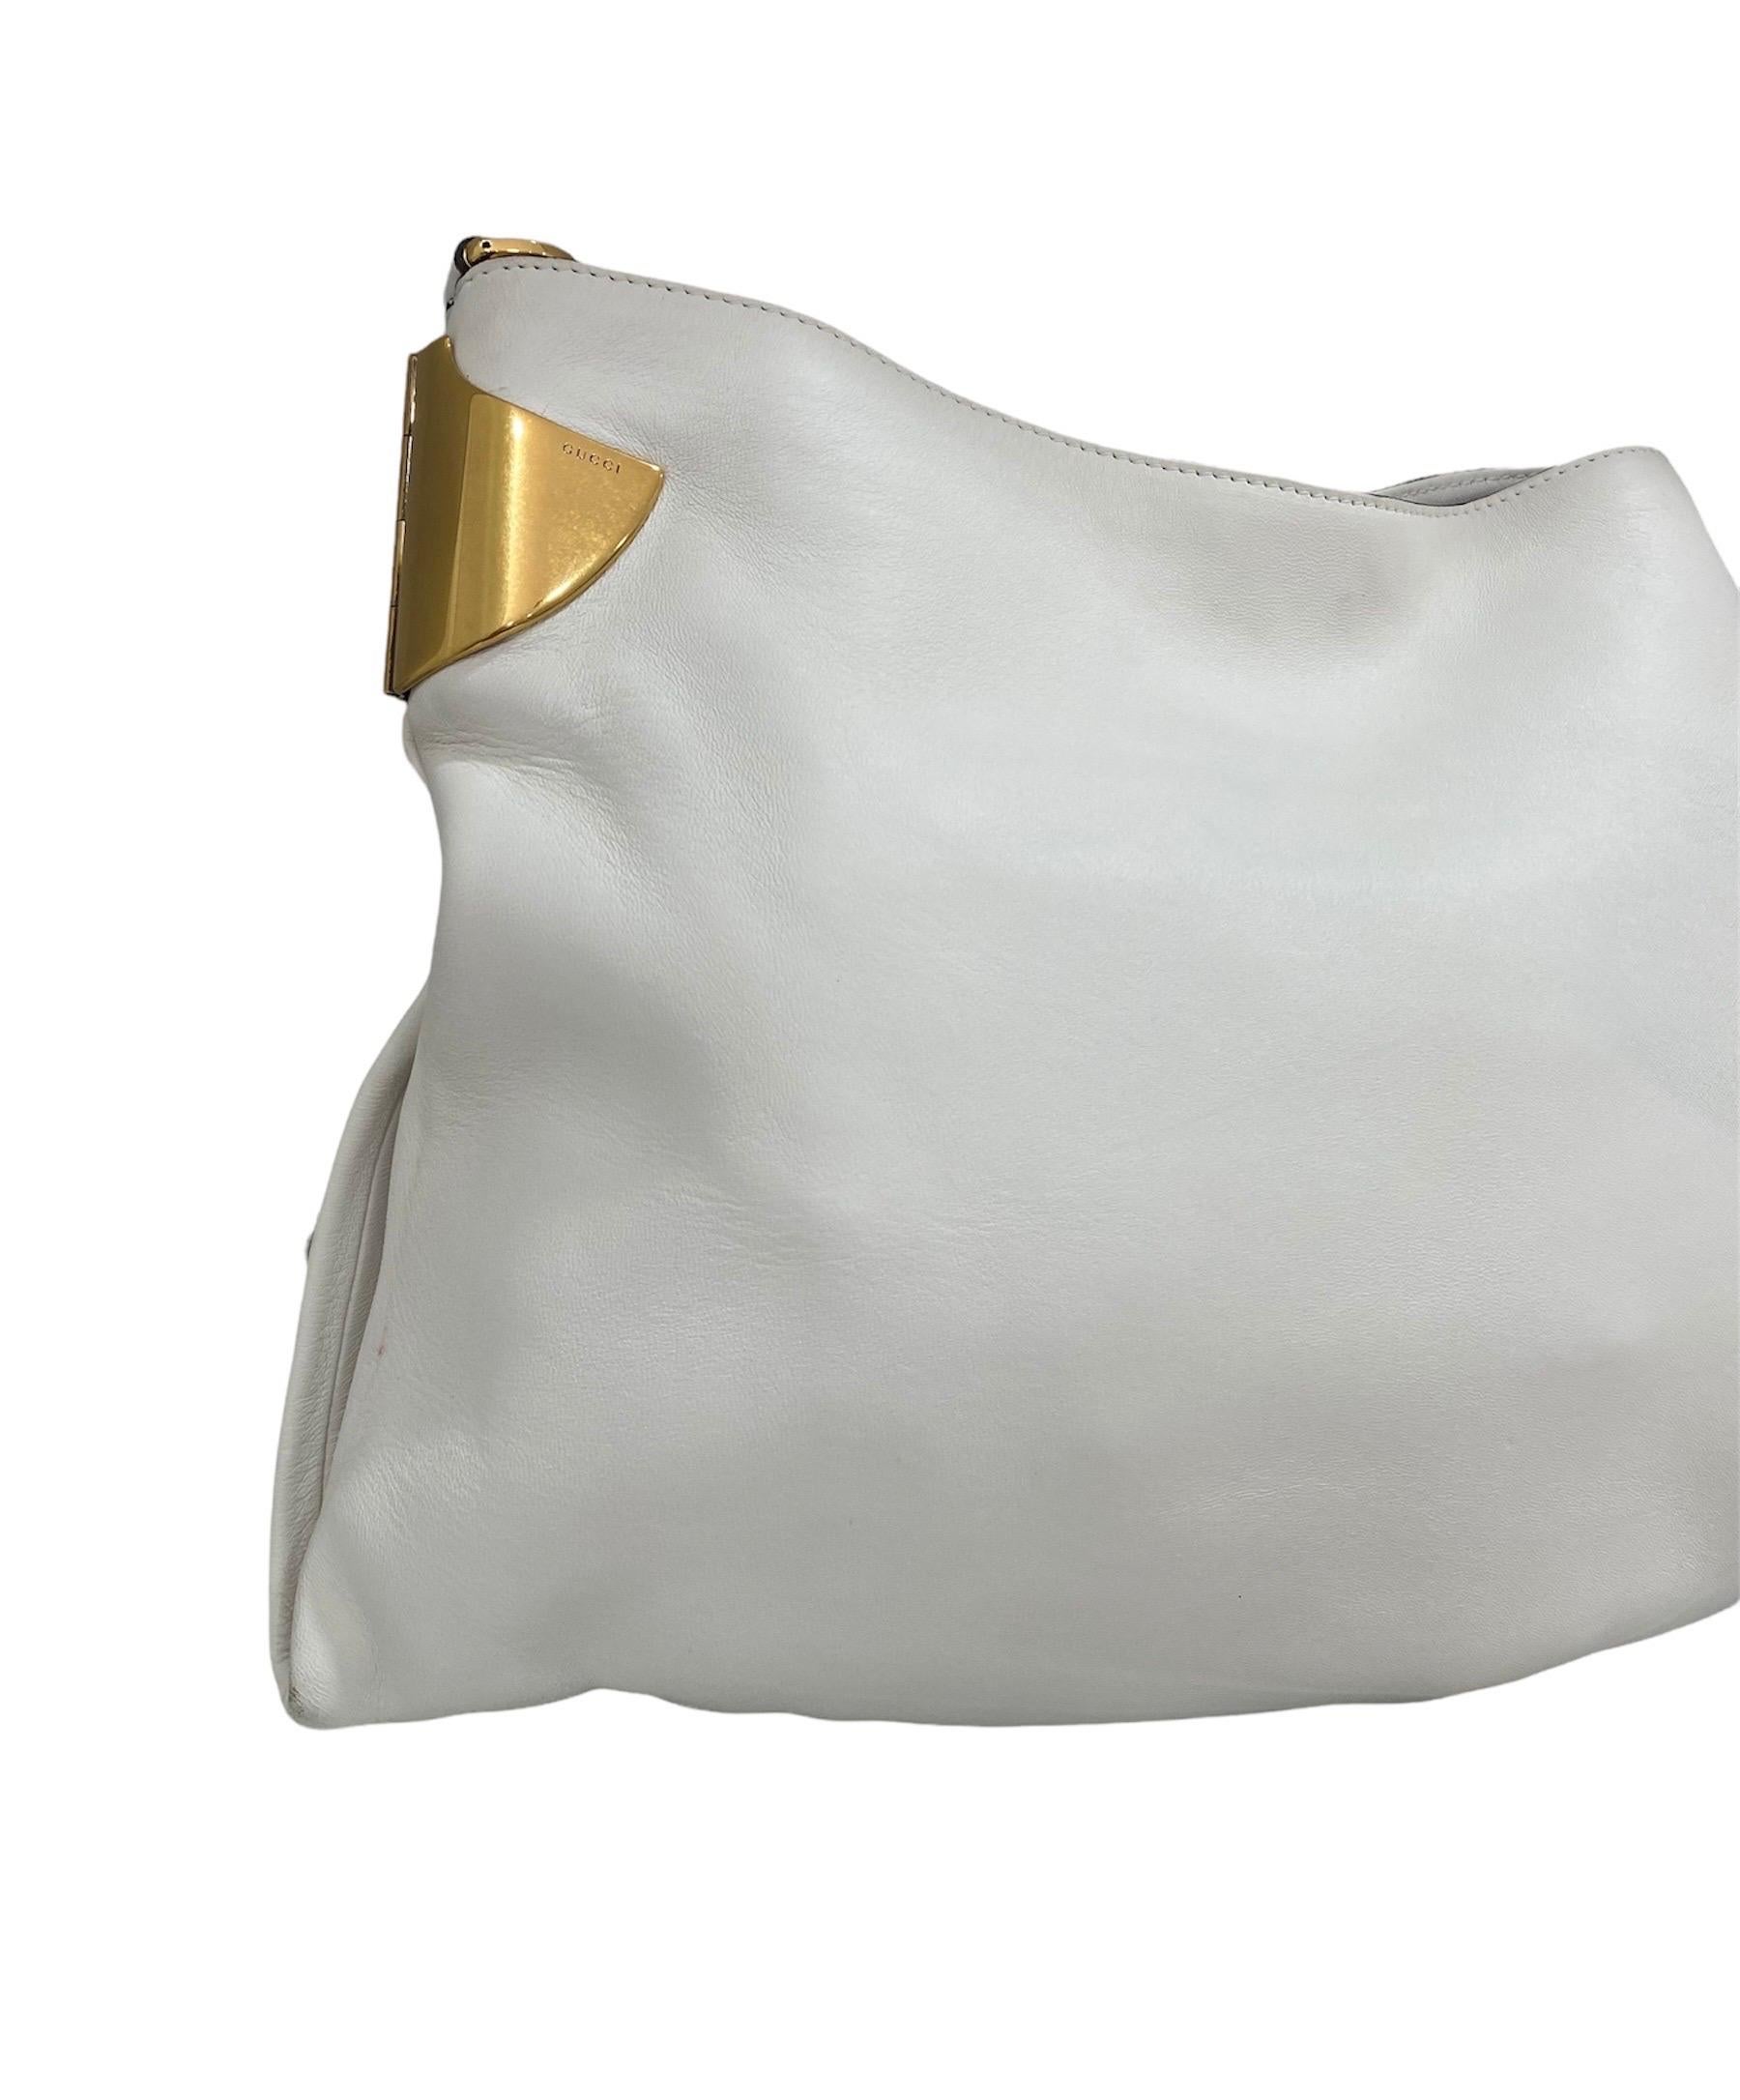 Women's Gucci Shoulder Bag White And Gold For Sale